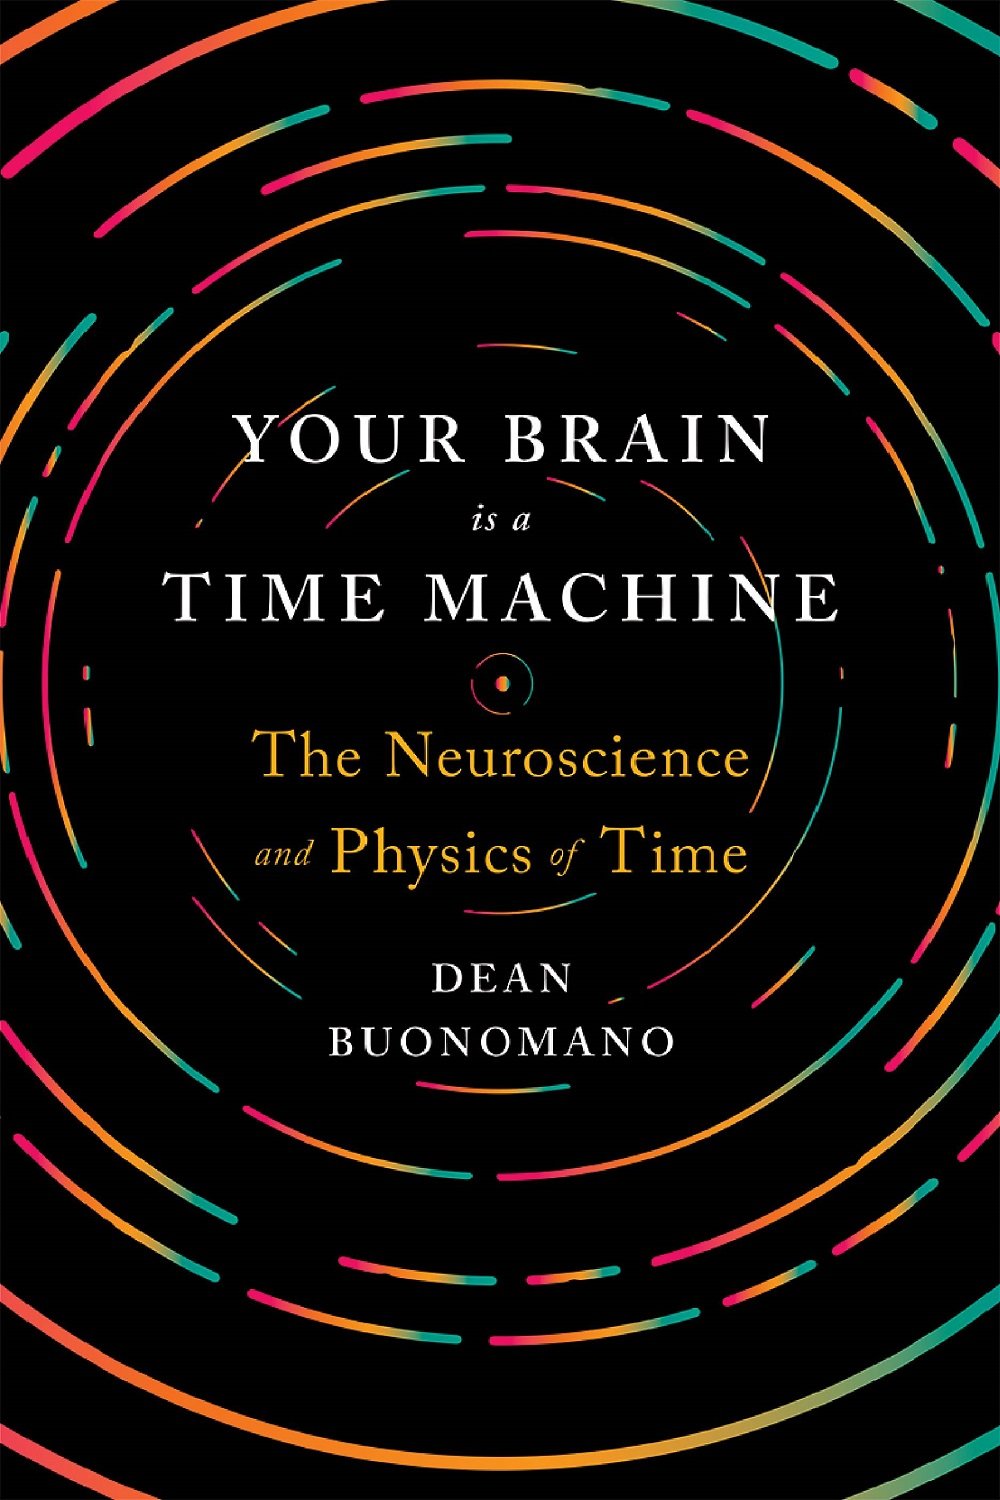 Your Brain is a Time Machine